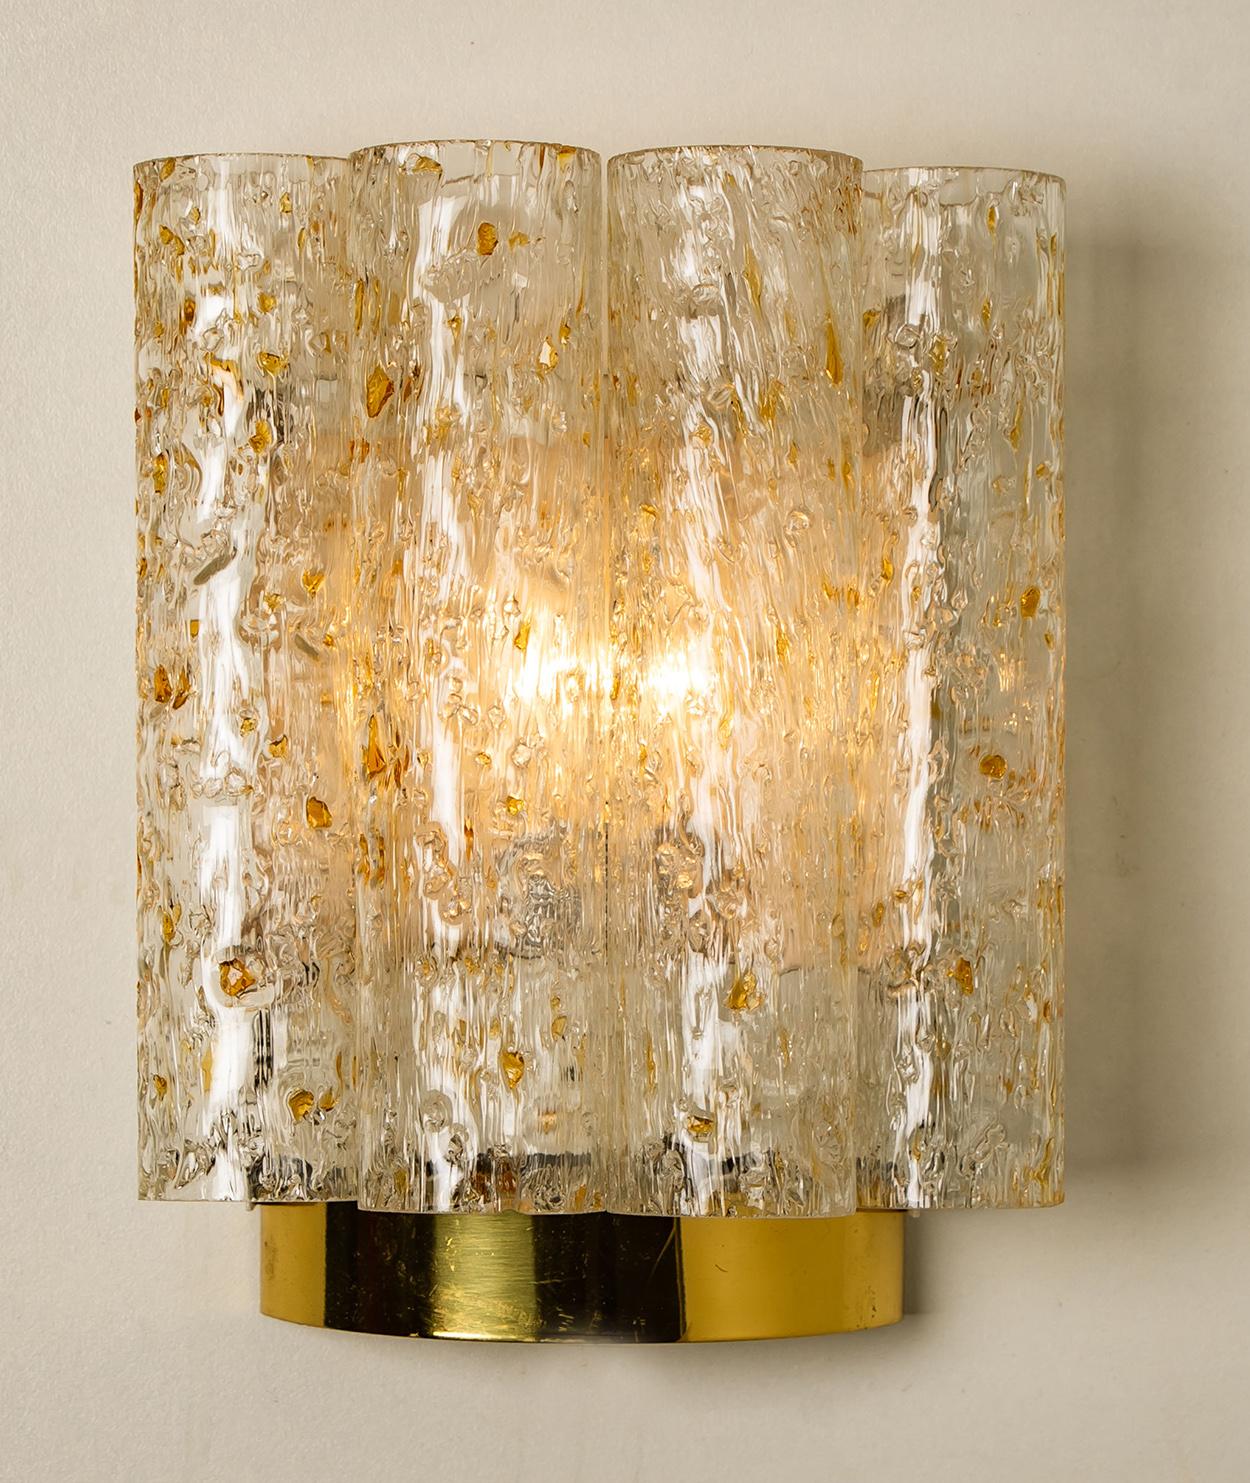 1 of the 6 Doria Wall Lamps in Brass and Glass, 1960s For Sale 9